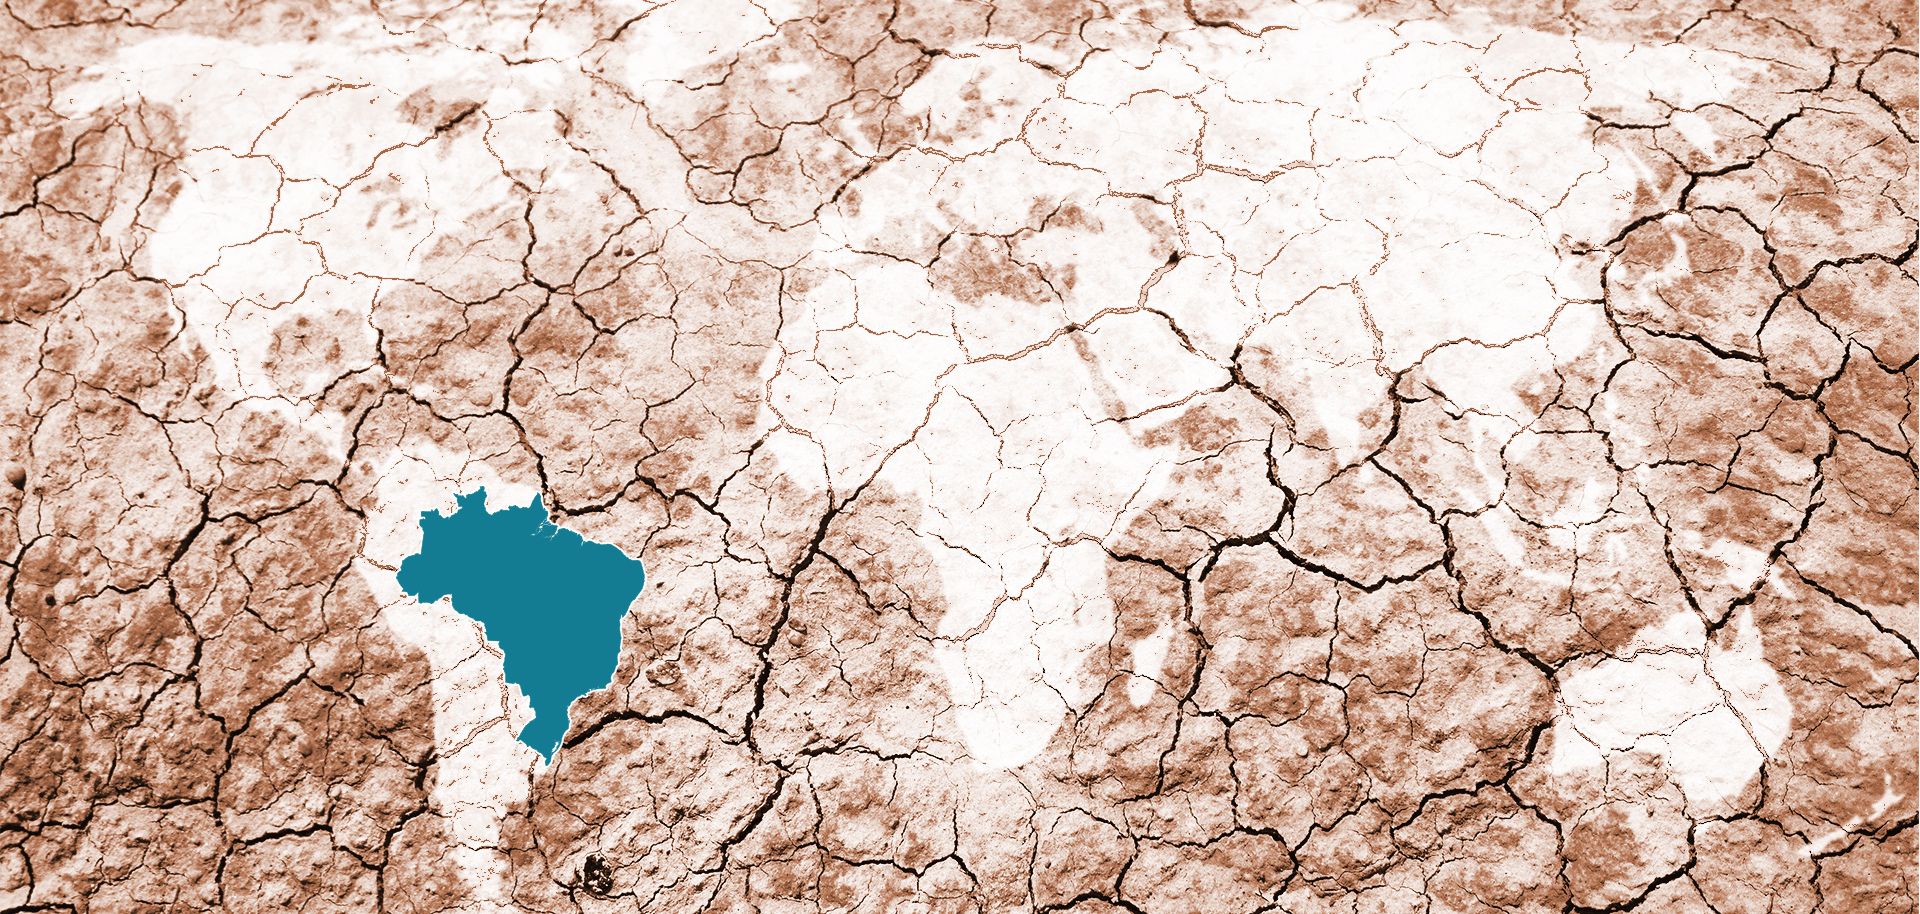 The drought gripping Brazil's Sao Paulo state – the worst in nearly a century -- will cause short-term water restrictions, but may also lead to investment in inadequate water infrastructure.